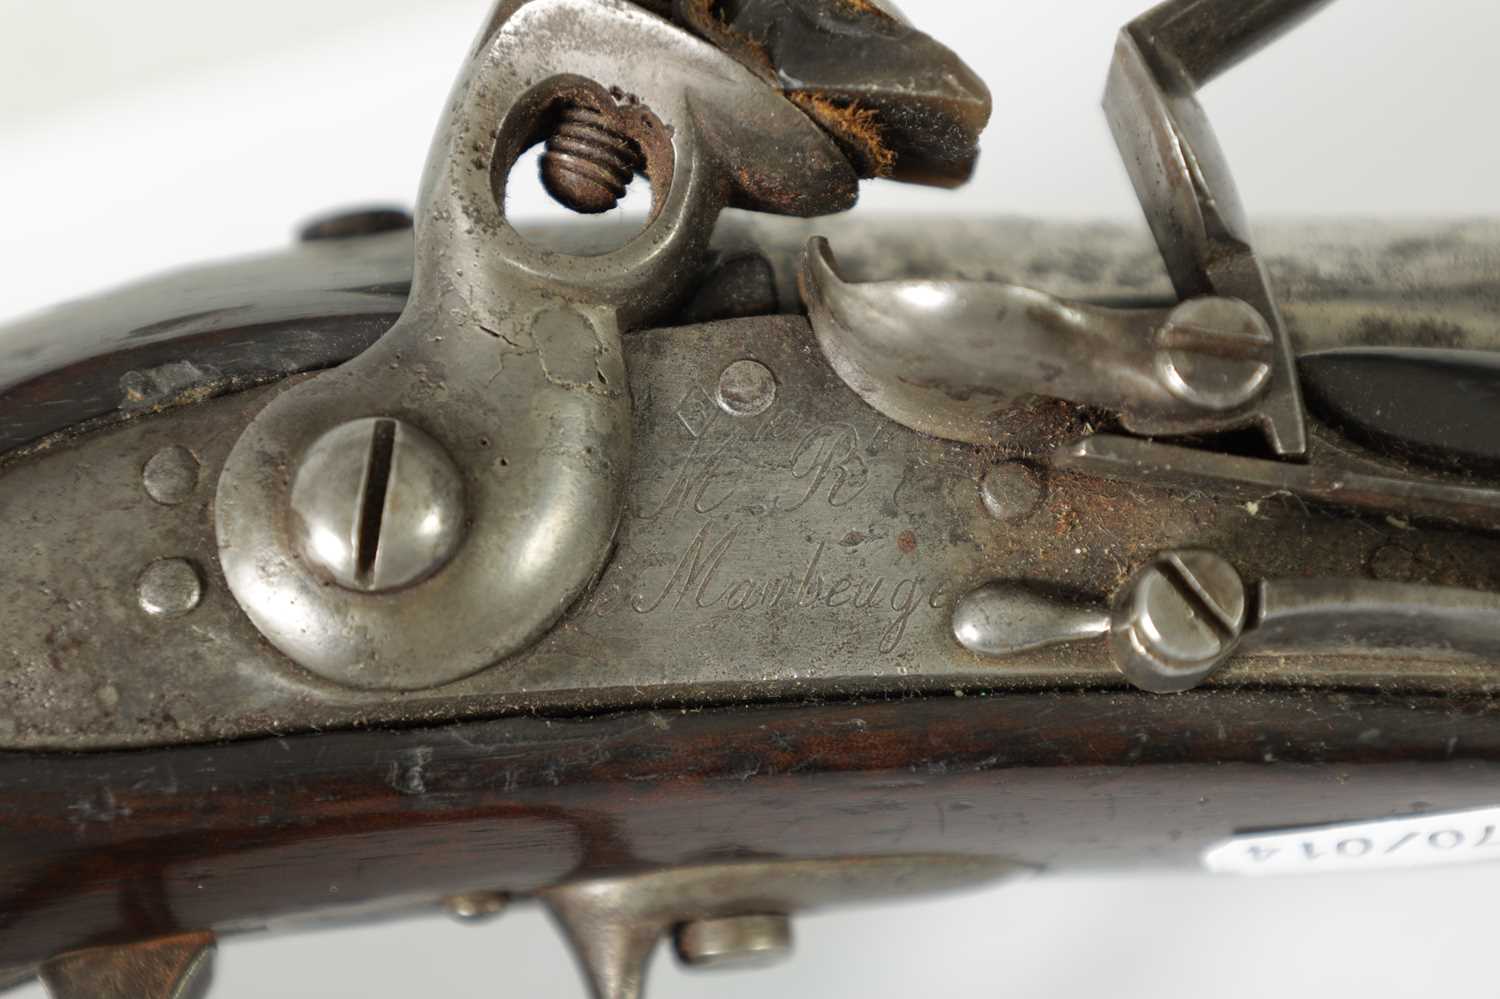 AN EARLY 19TH CENTURY FRENCH FLINTLOCK SERVICE PISTOL SIGNED MAUBEUGE - Image 2 of 7